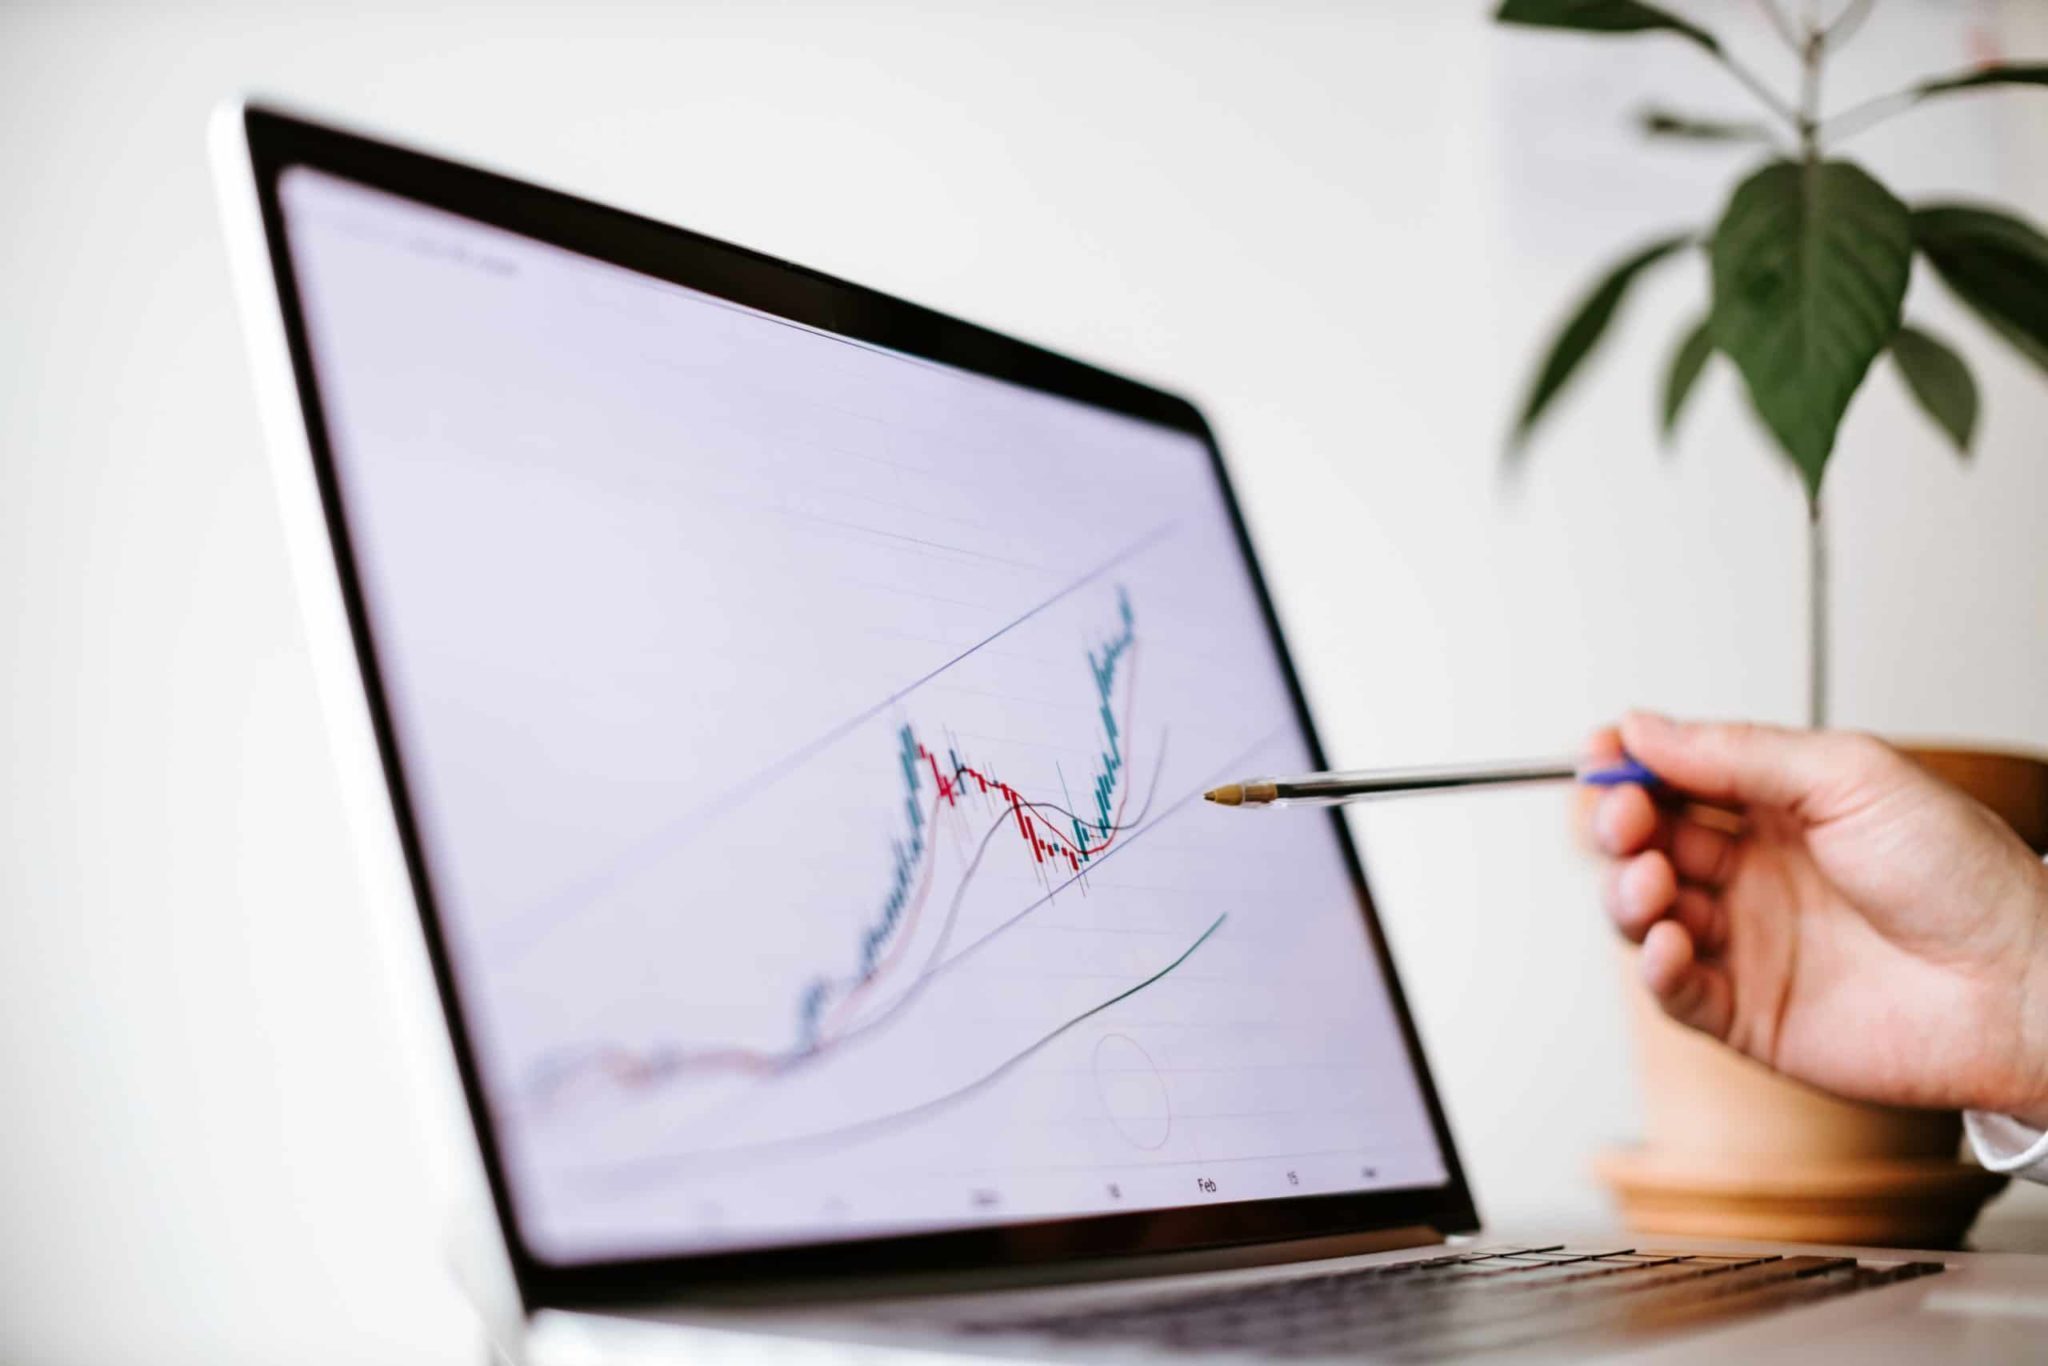 Someone holding a pen pointing at a computer screen showing a stock chart